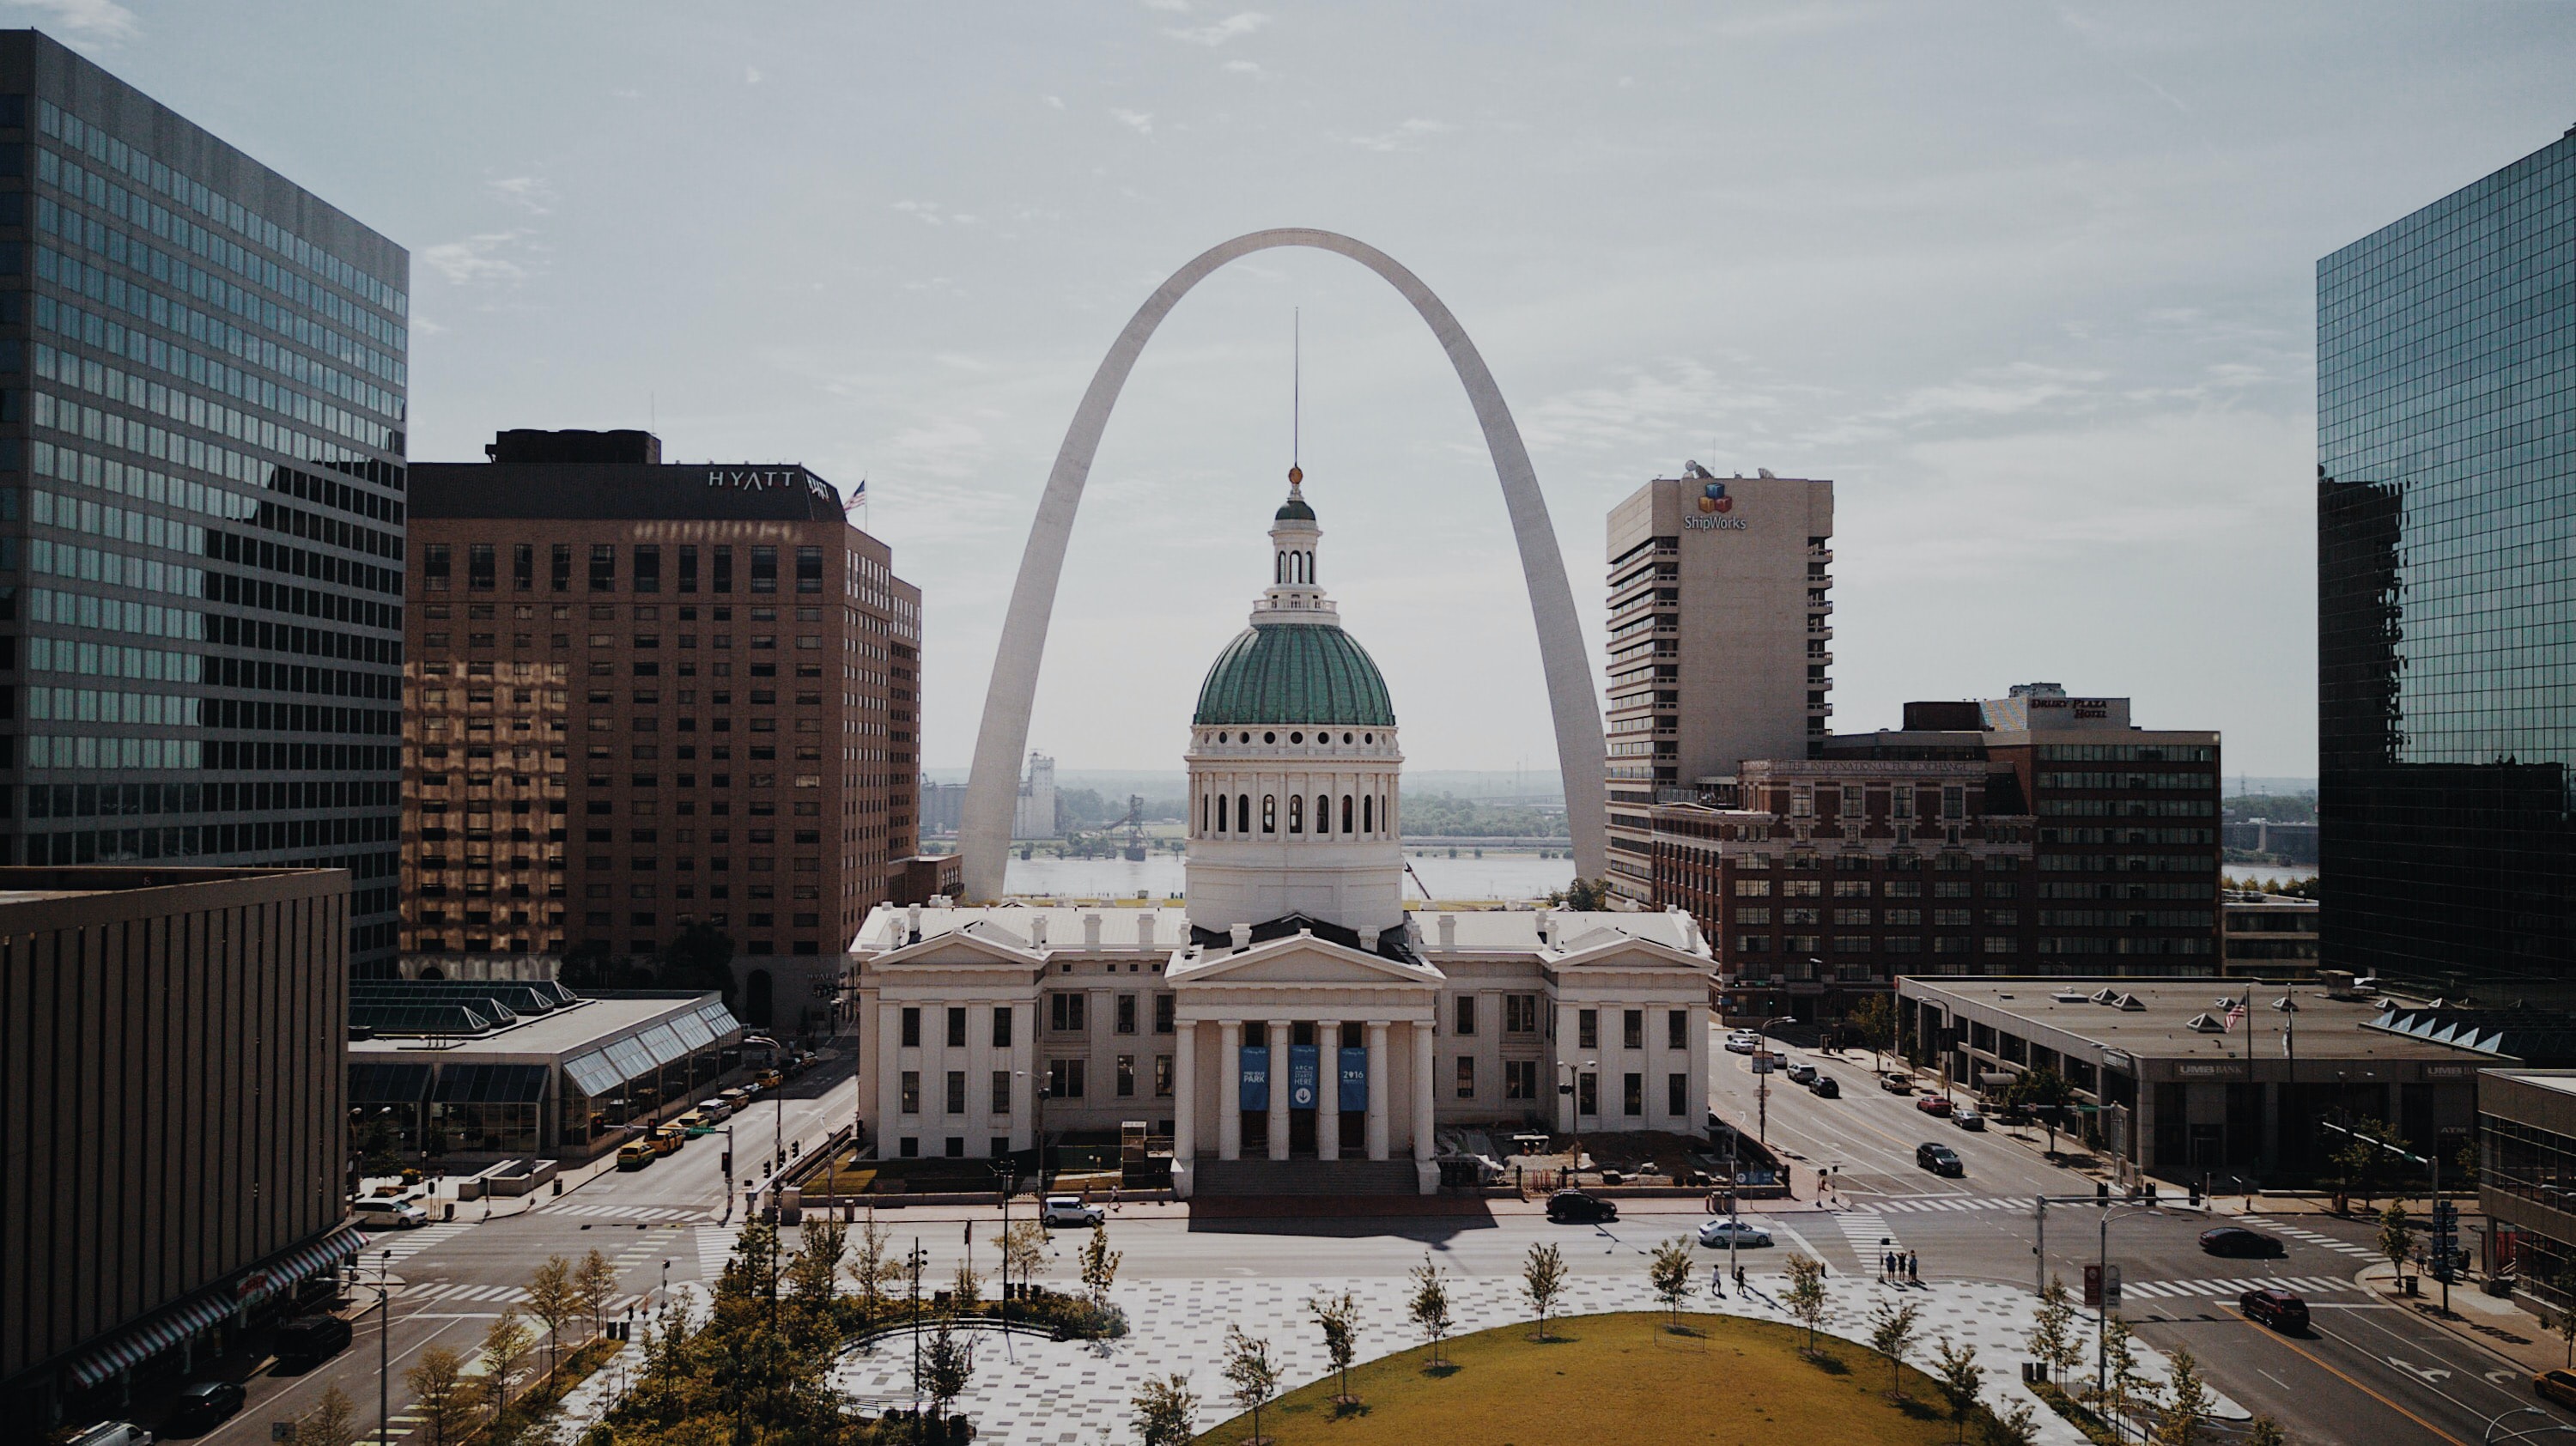 The Old St. Louis County Courthouse with the St. Louis Arch in the background.